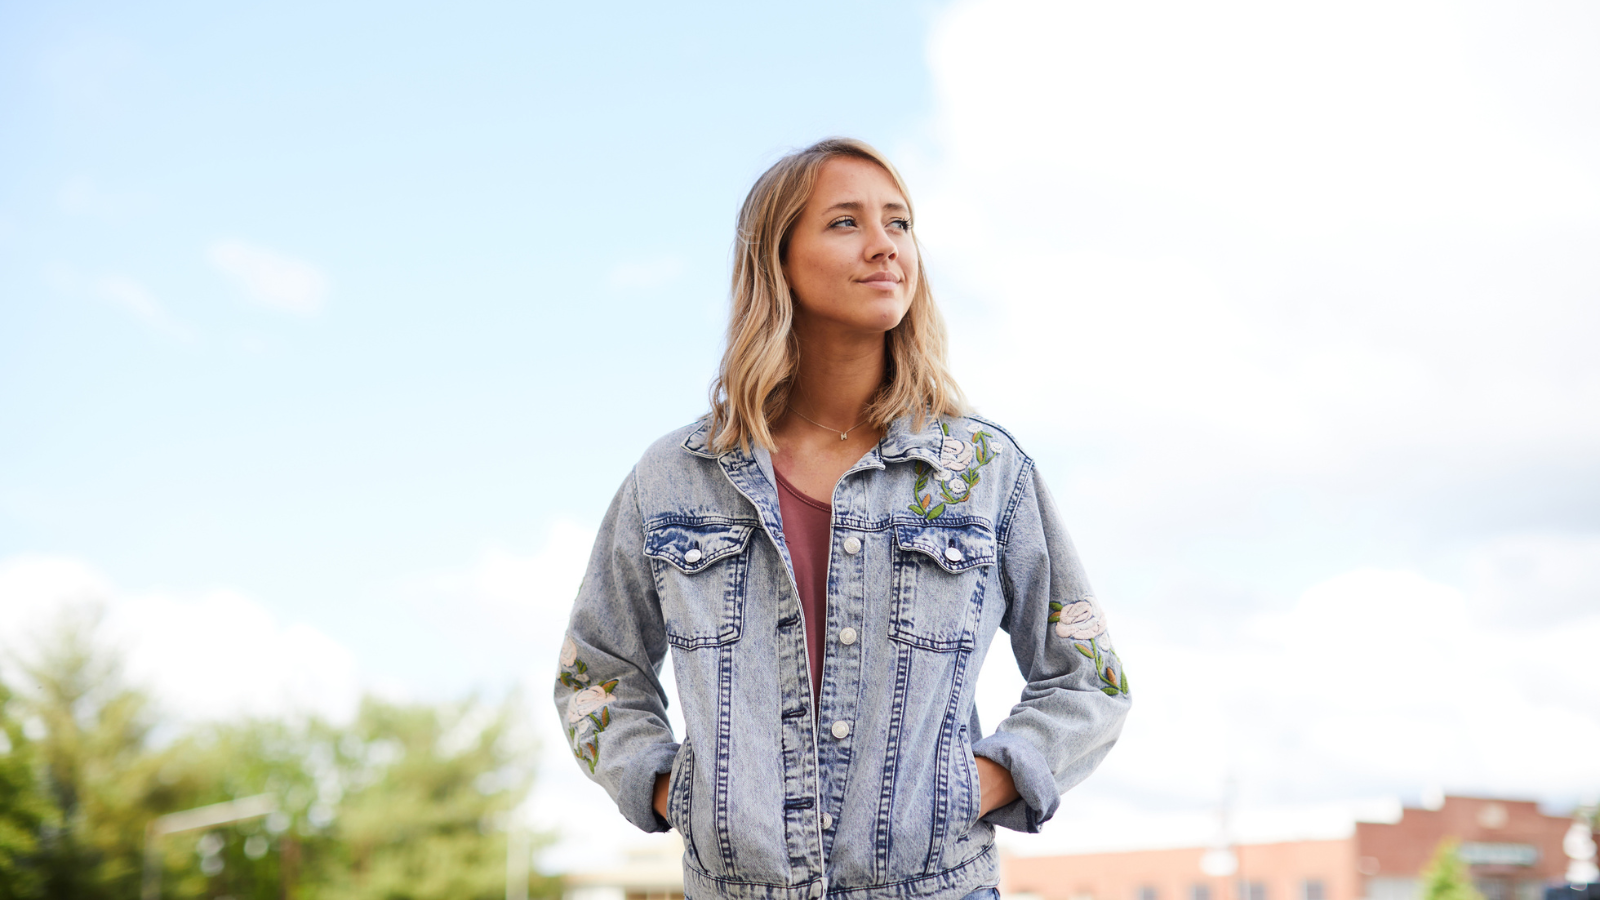 Confident girl in jean jacket looking to the sky outside